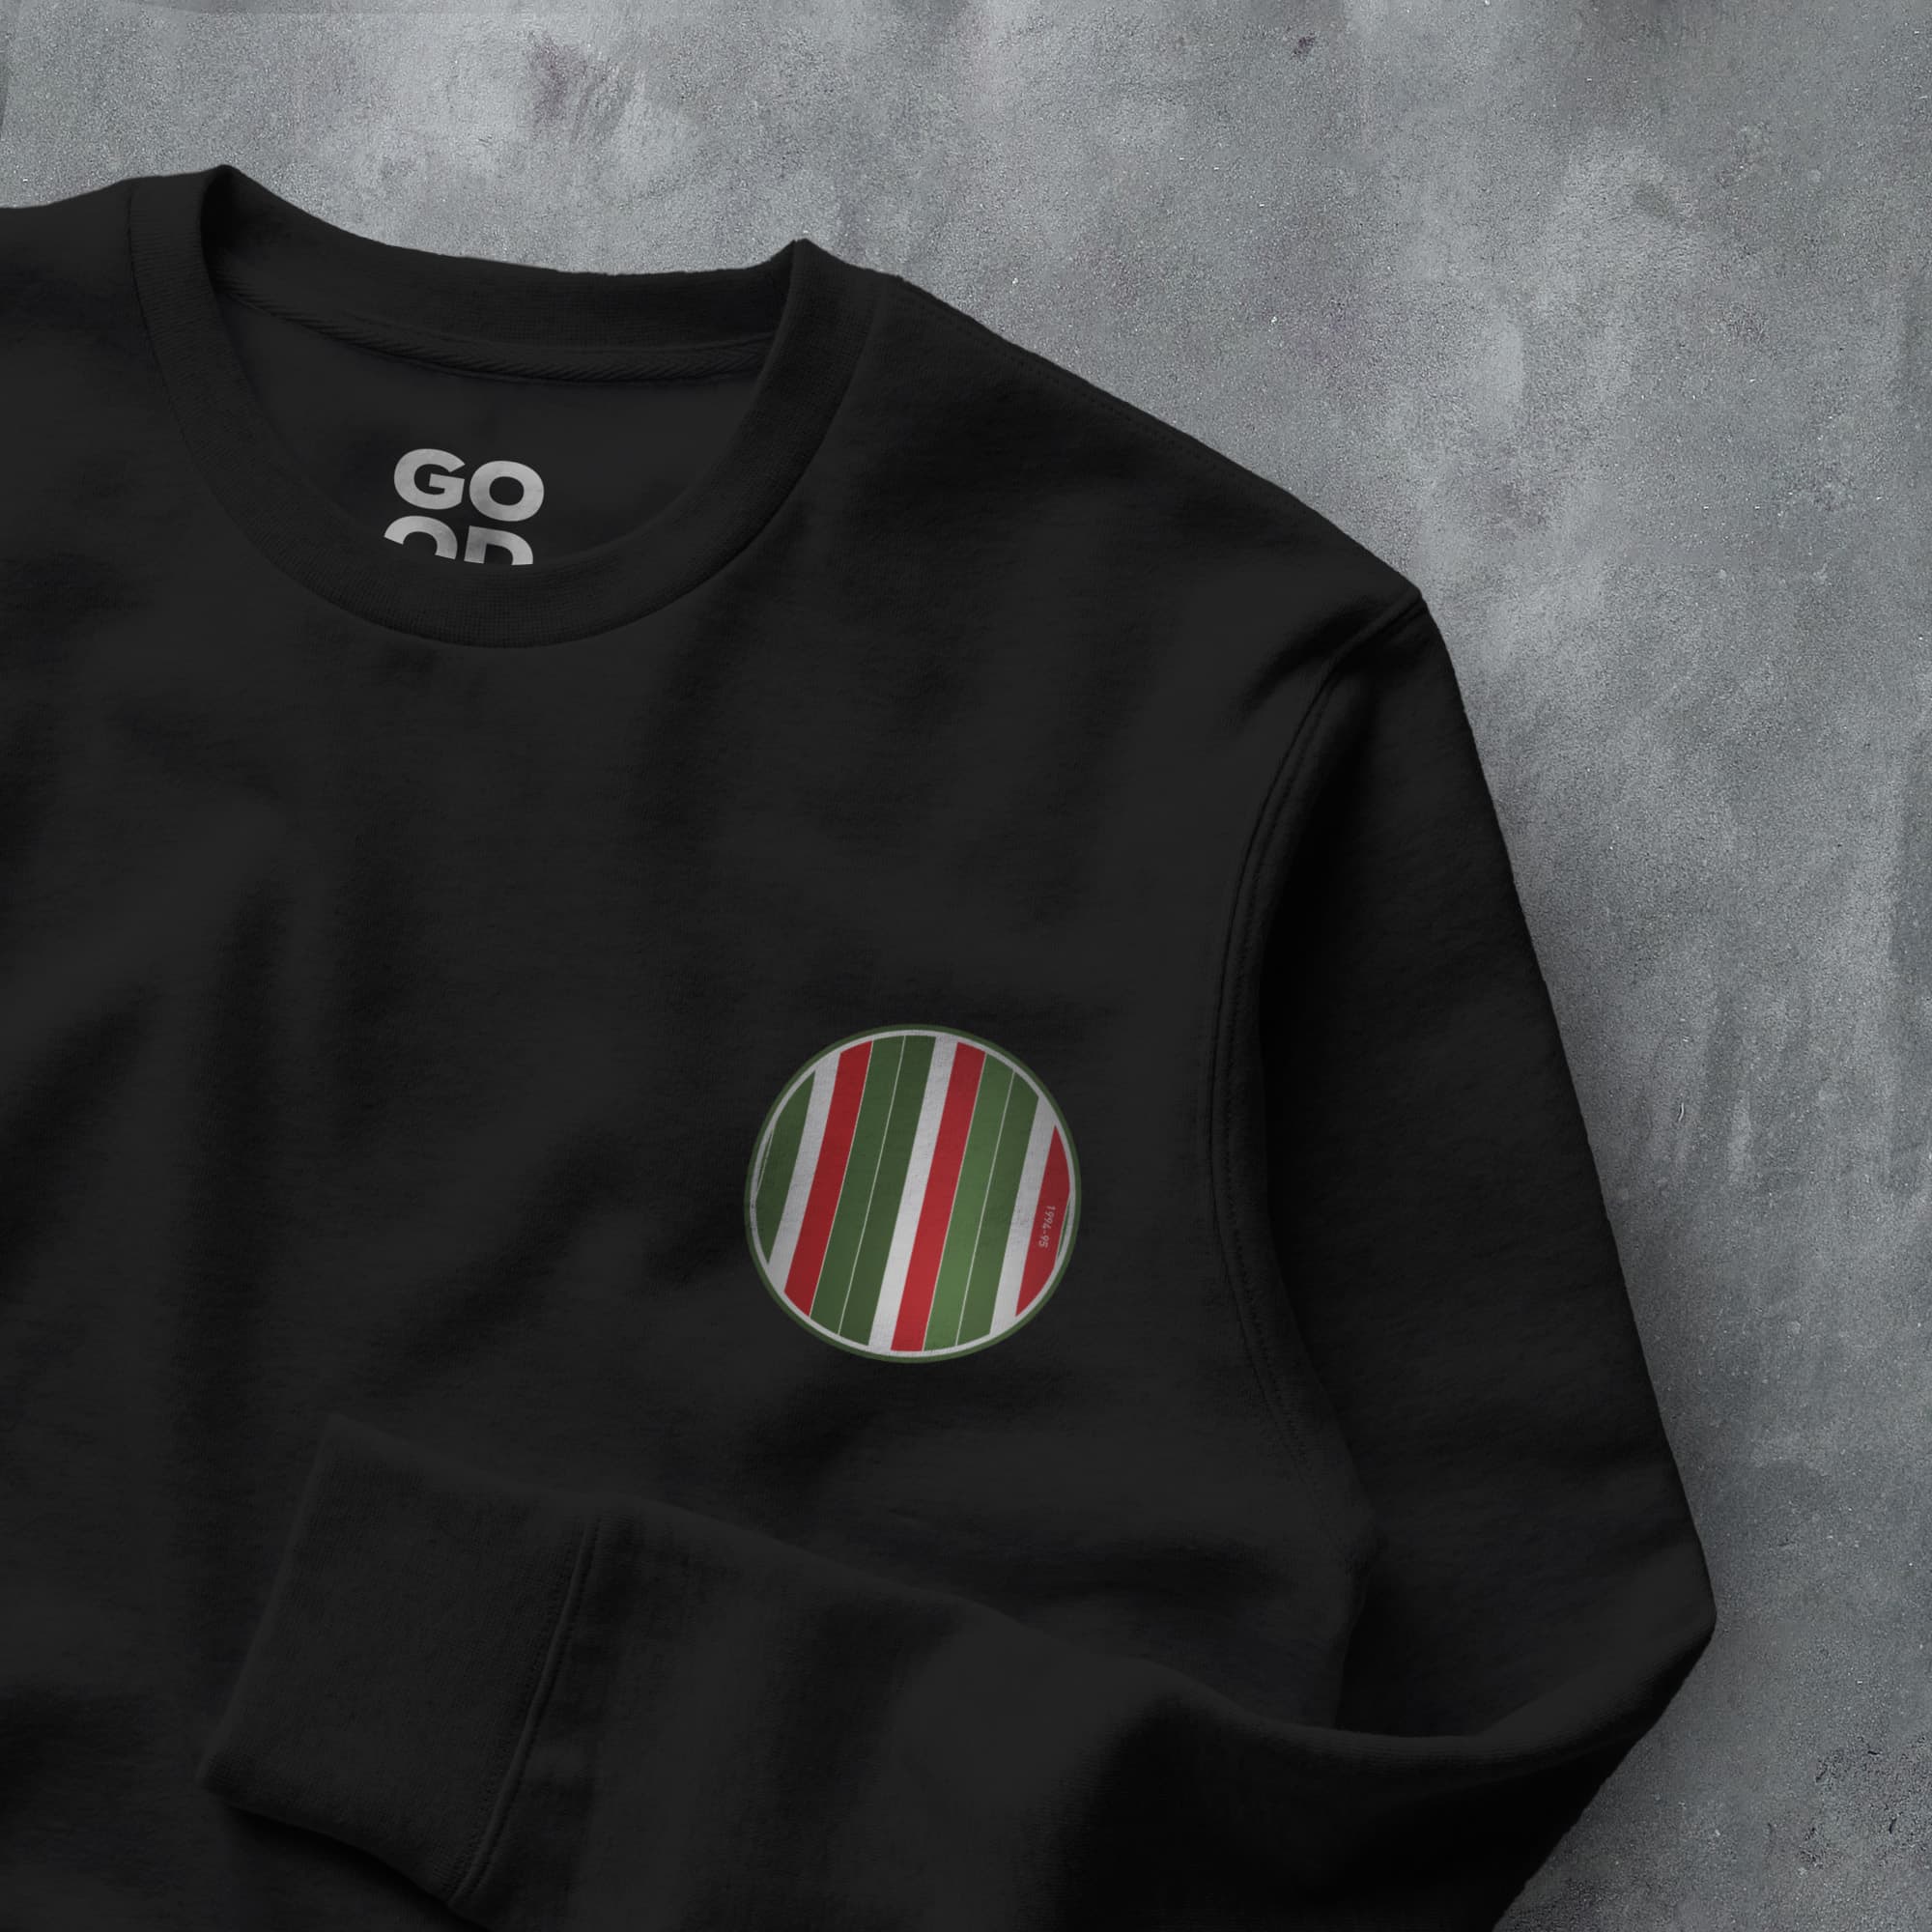 a black sweatshirt with a green and red striped pocket